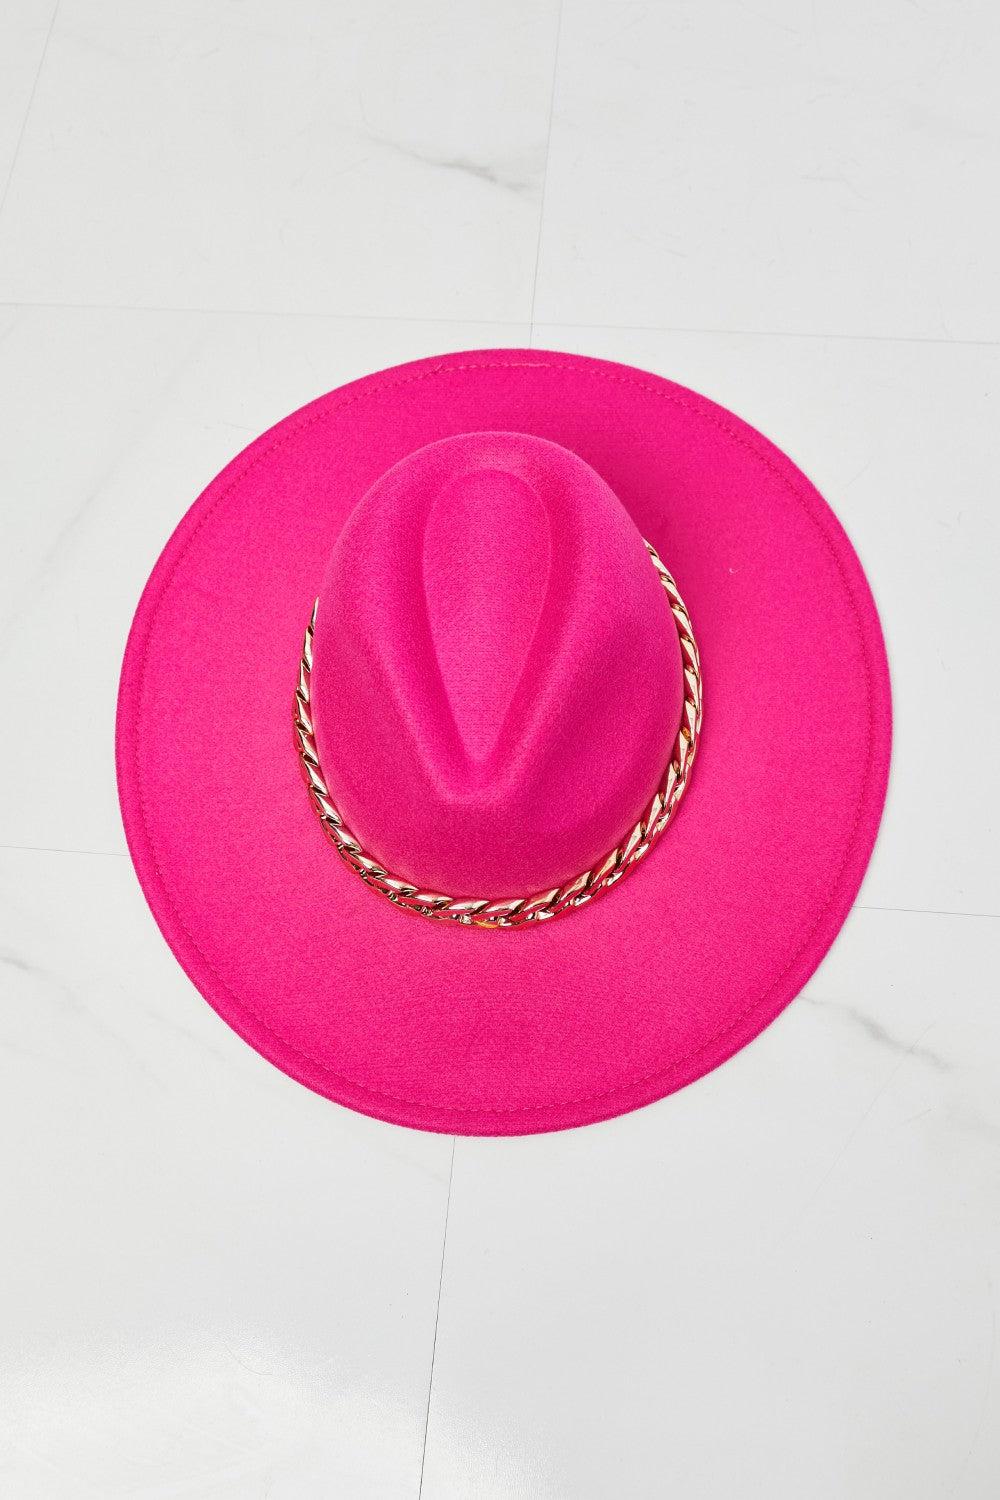 Fame Keep Your Promise Fedora Hat in Pink BLUE ZONE PLANET